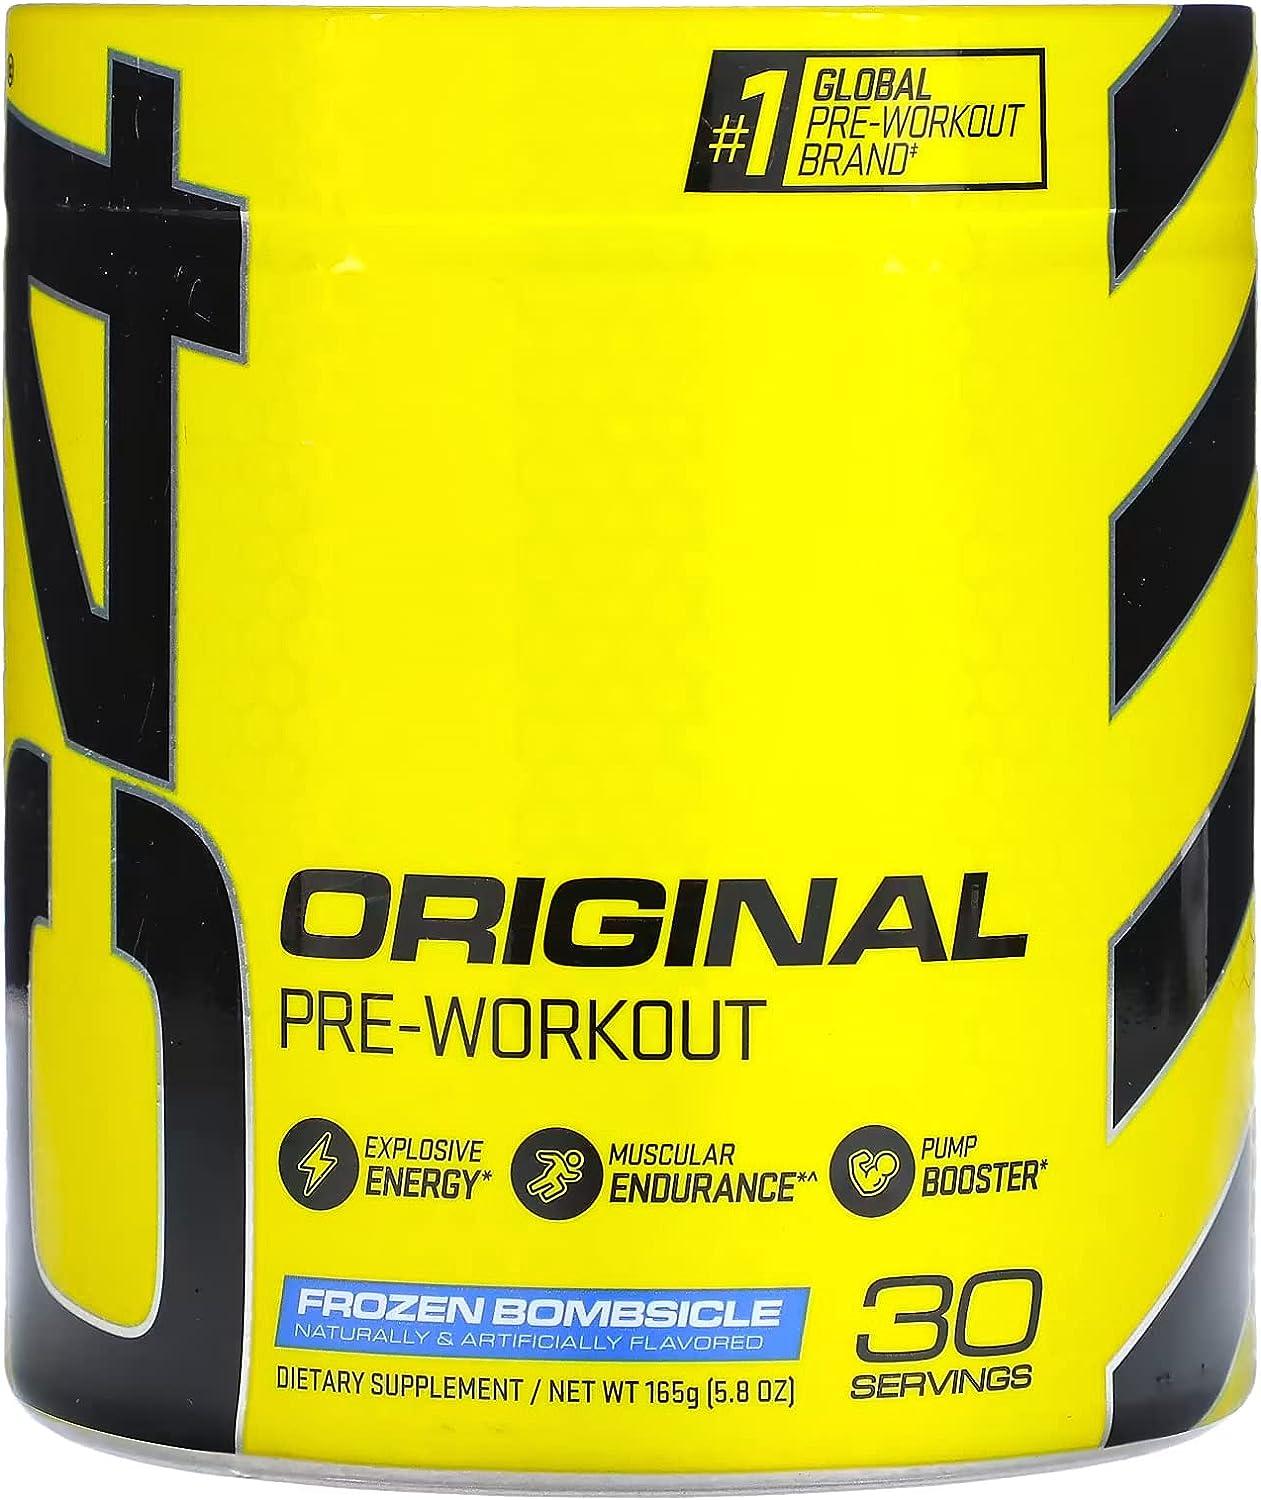 Cellucor Pre Workout Booster, Booster